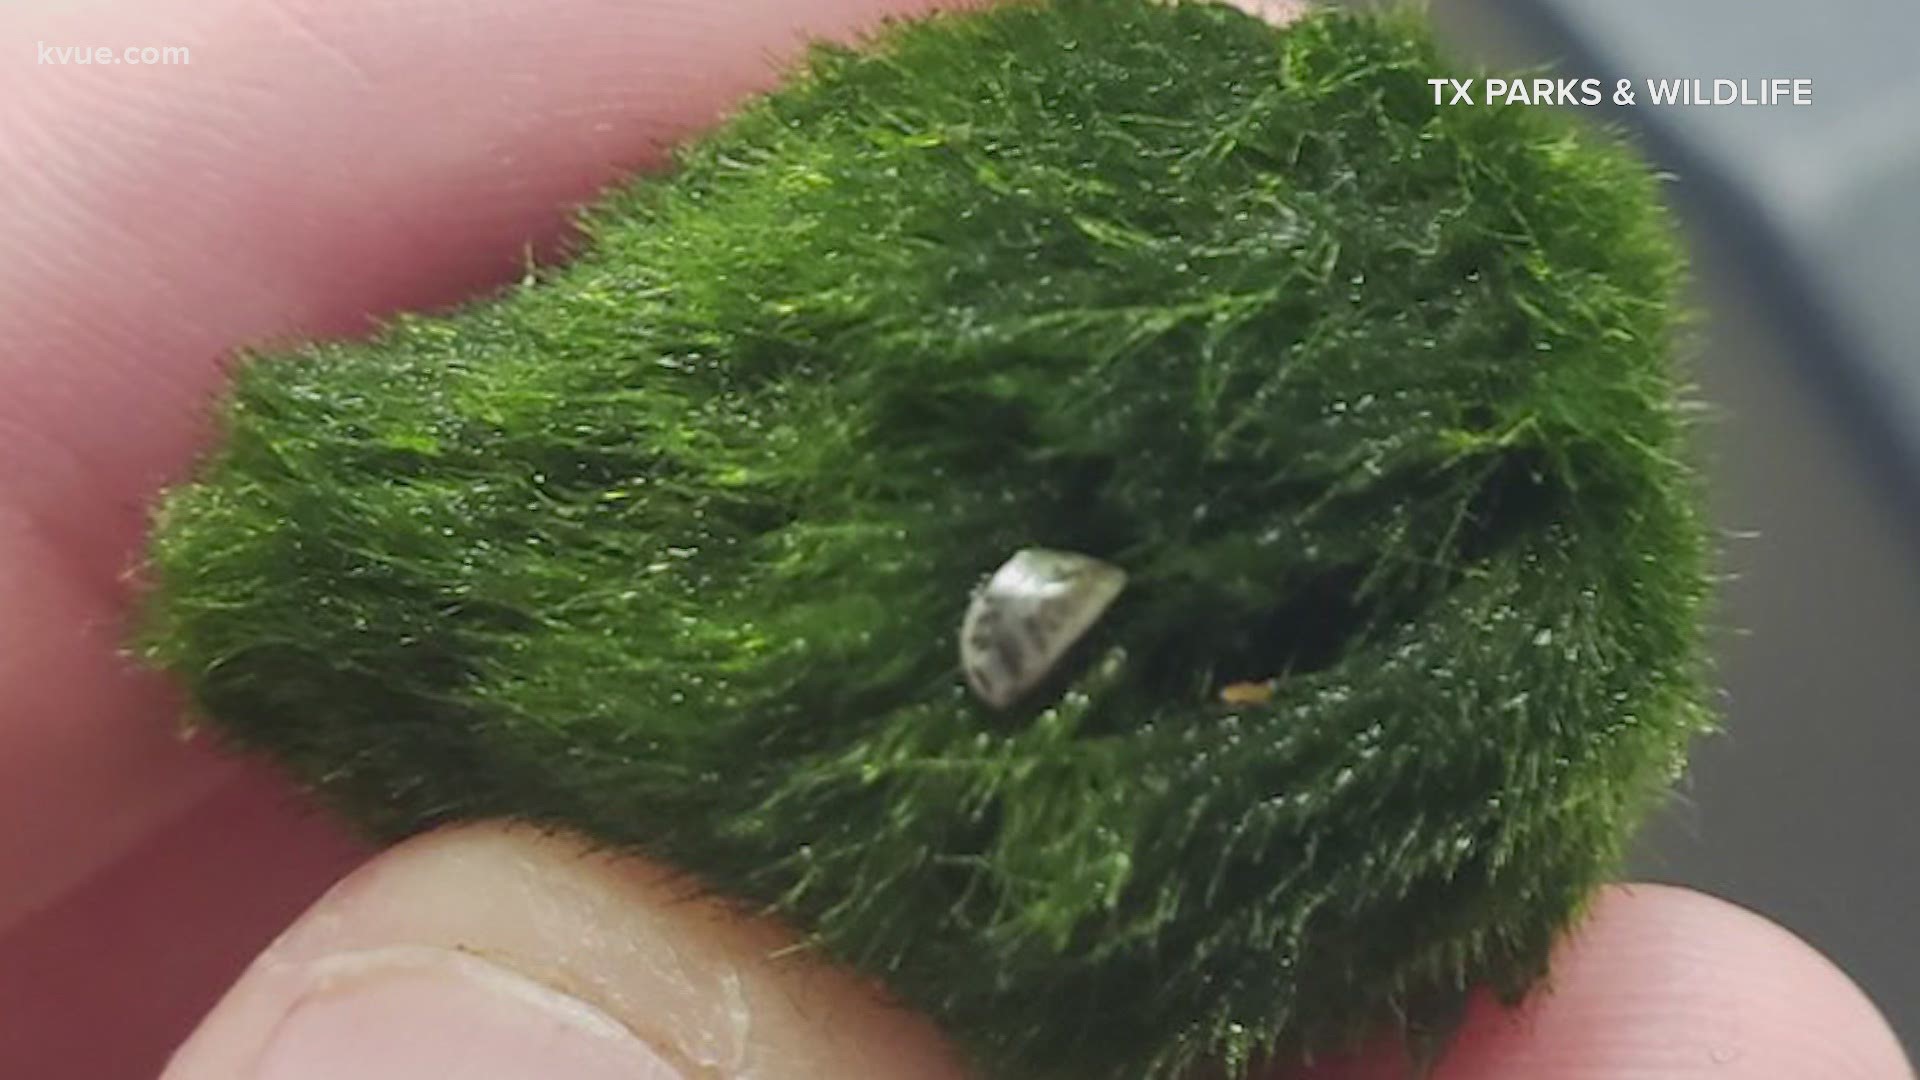 The moss balls have been sold at Petco and Petsmart.